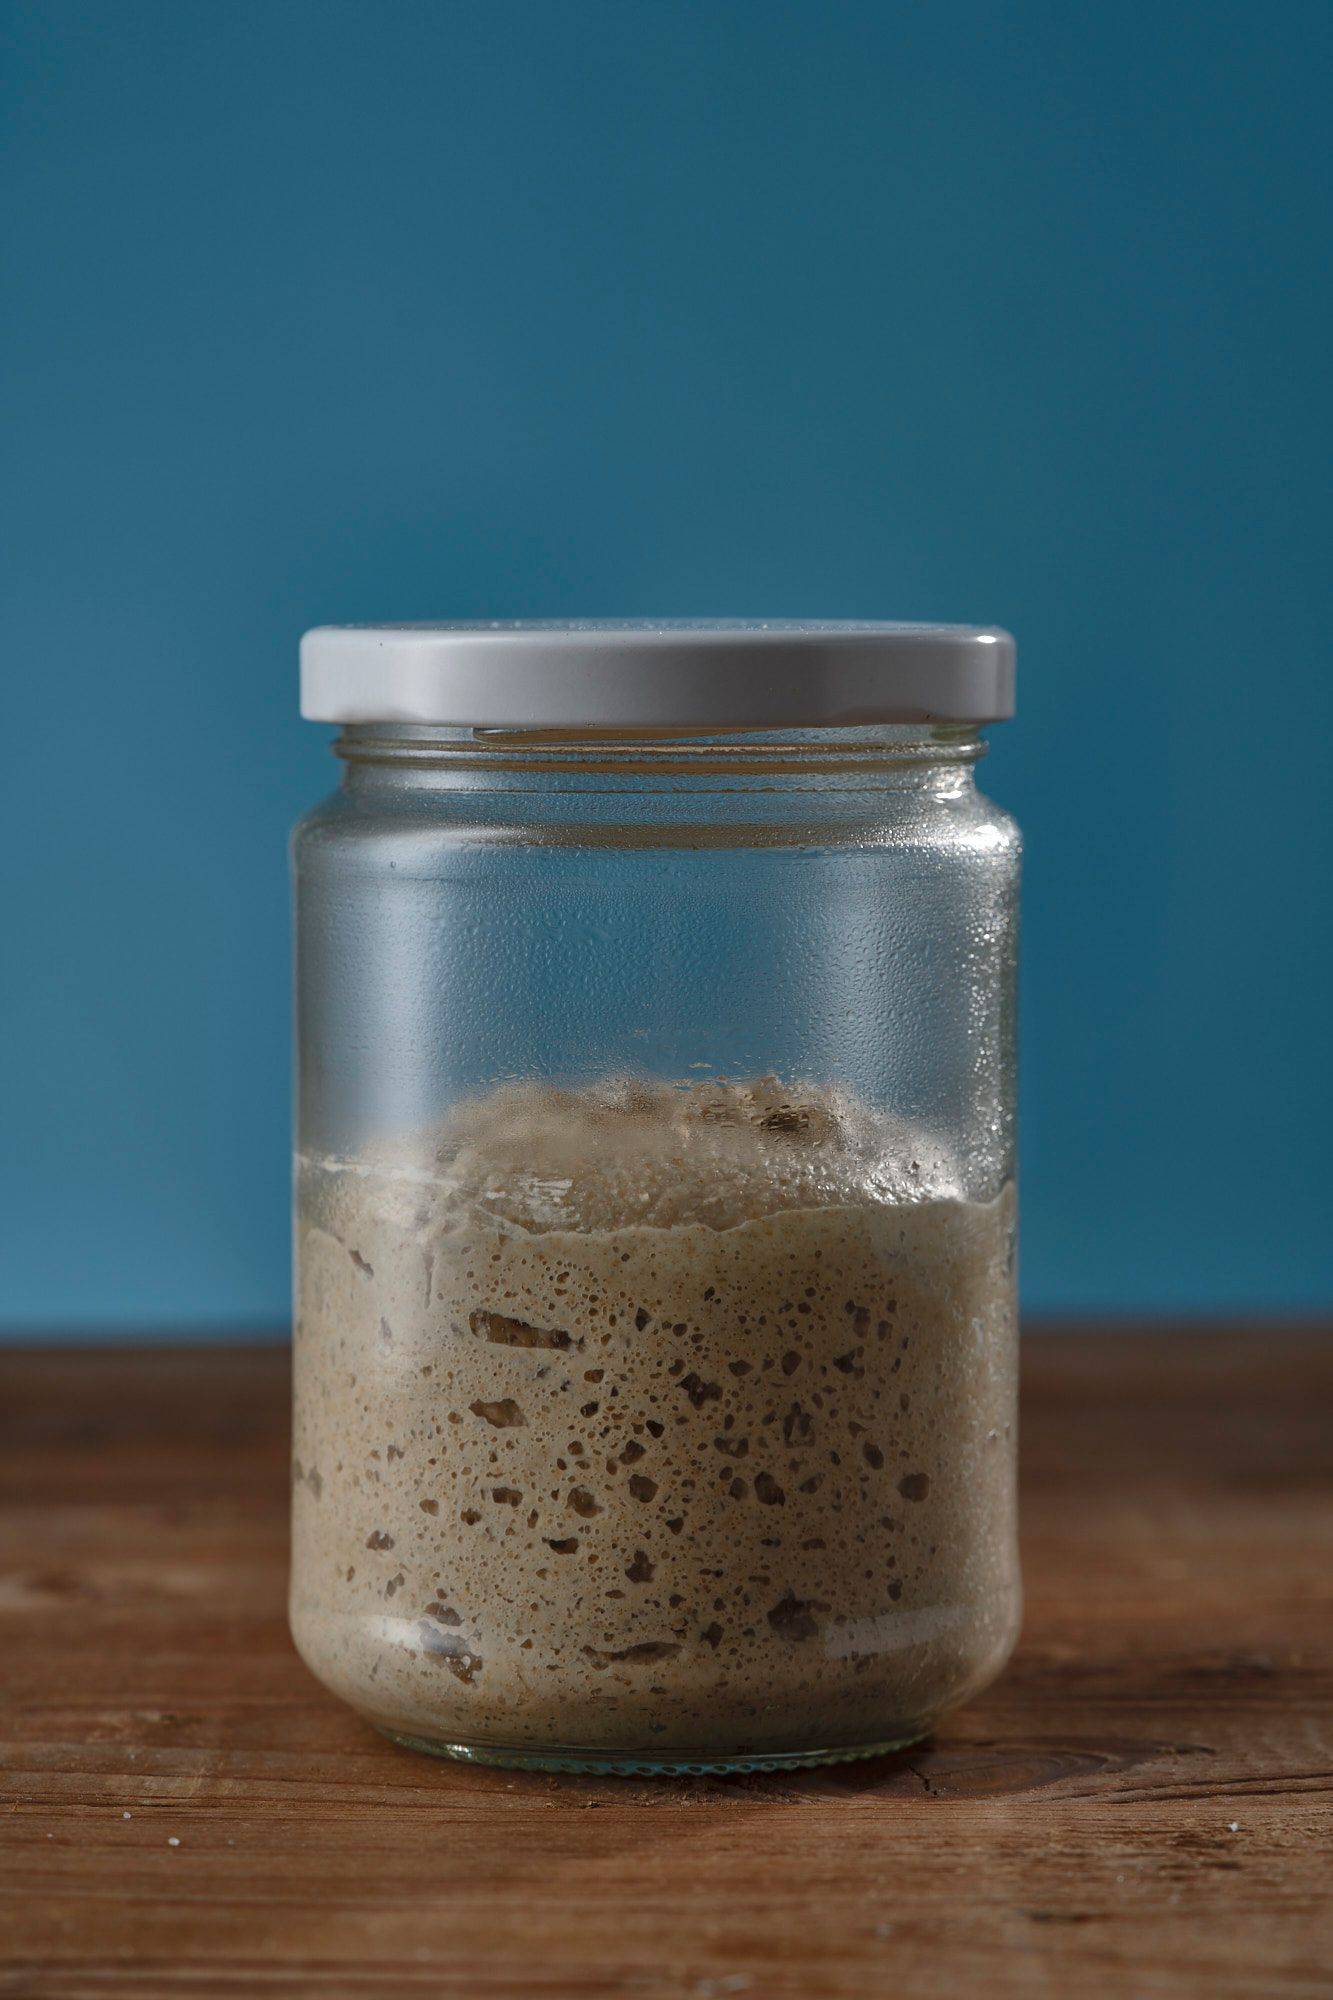 sourdough starter in a jar on a wooden table with blue background